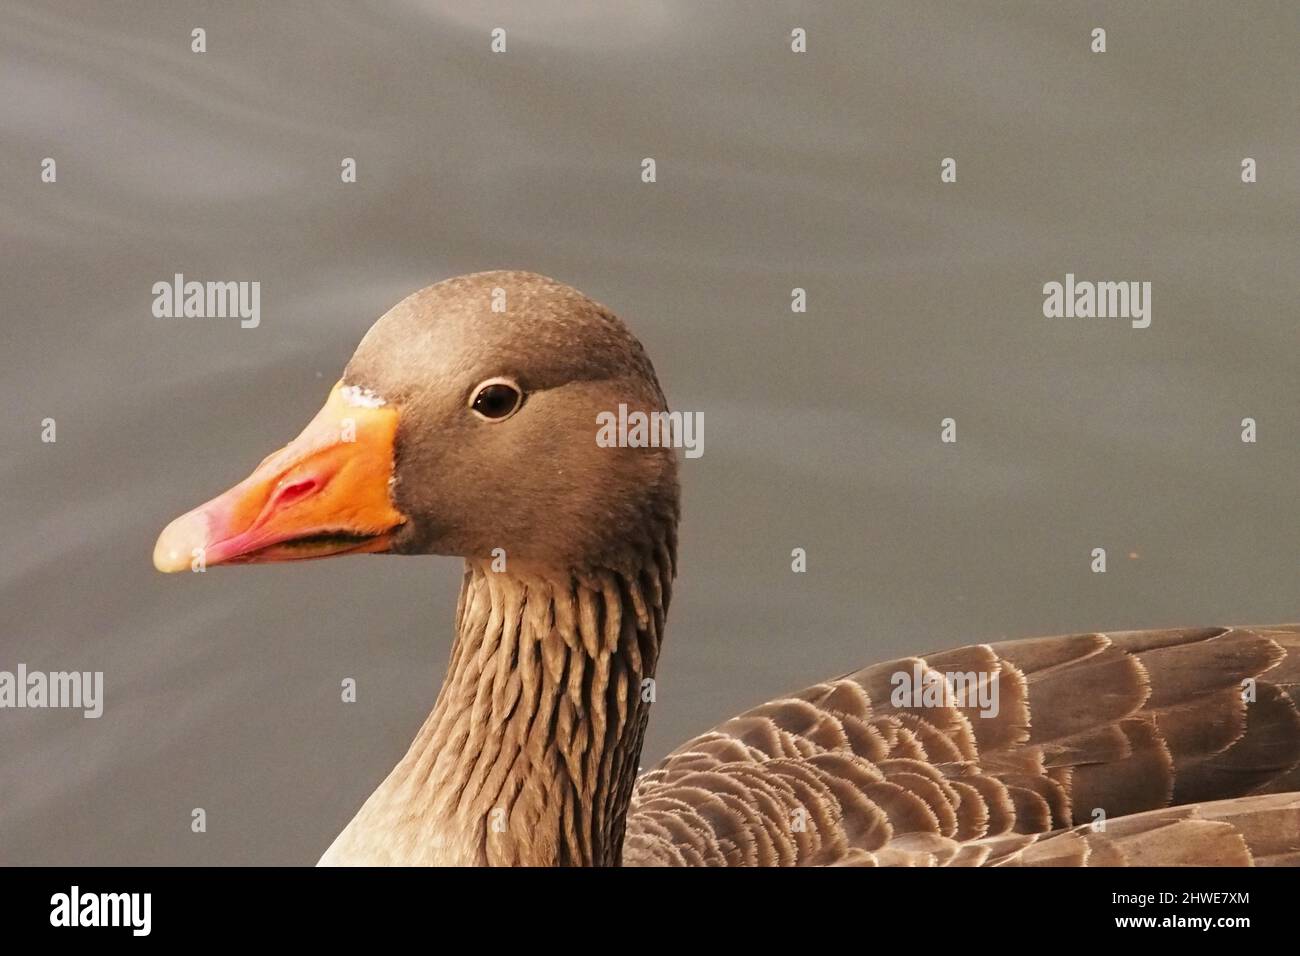 A view of a the head and back of a Greylag goose on water showing the plumage and beak colours Stock Photo